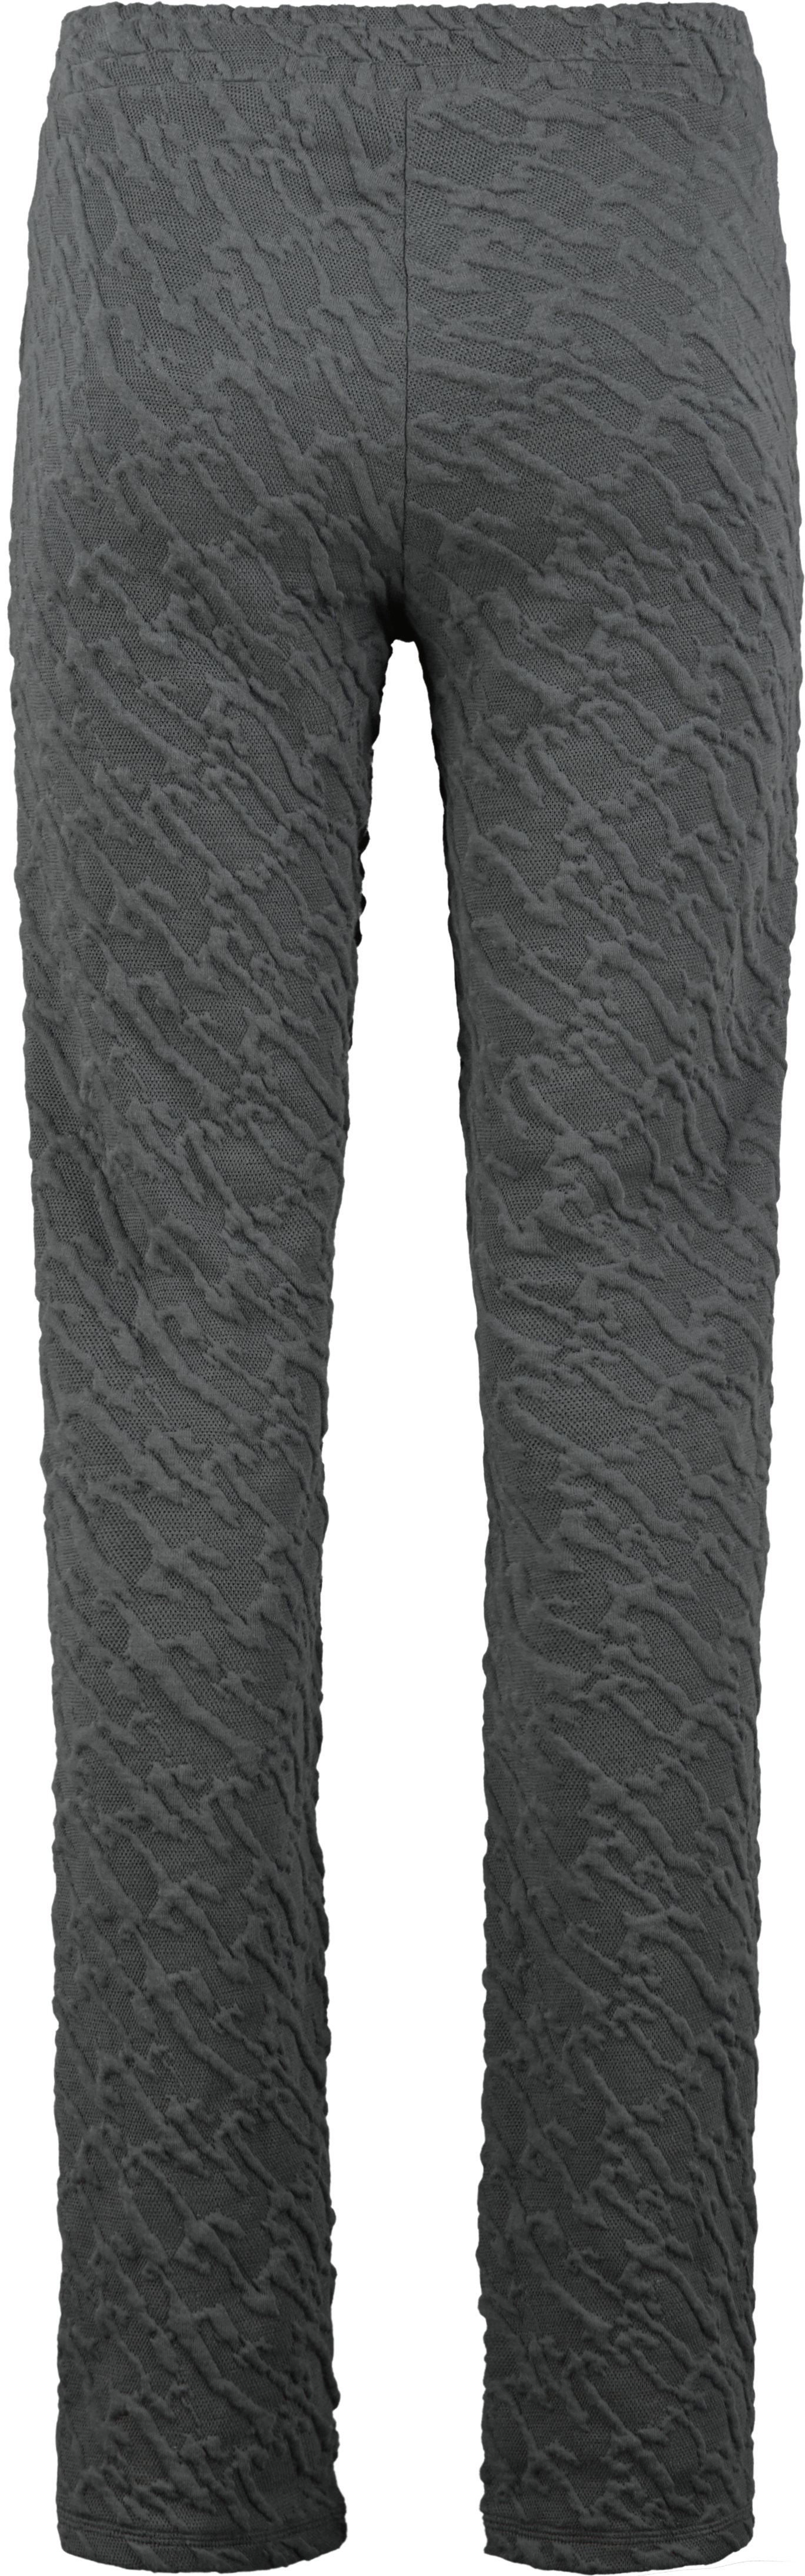 Women's Jacquard Fitted Trousers - Grey